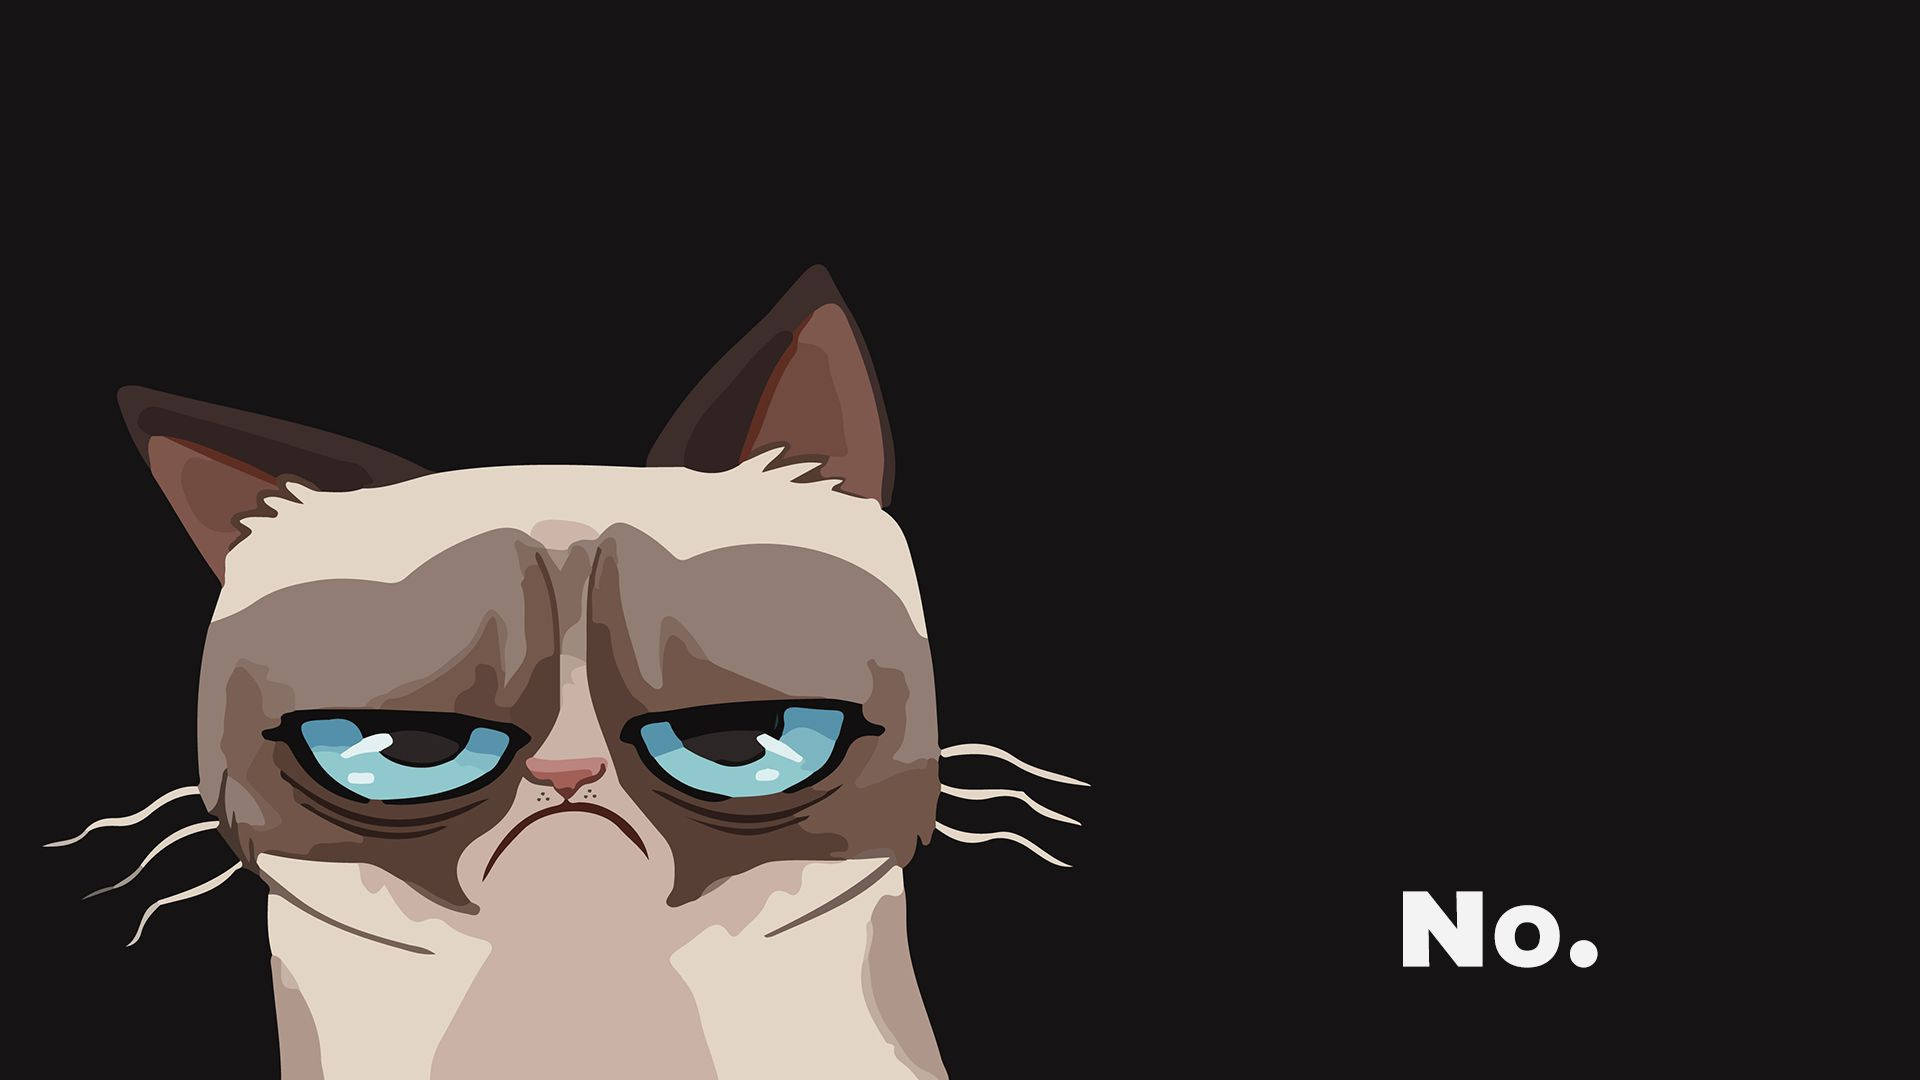 Grumpy cat meme with serious face expression in a black background saying 